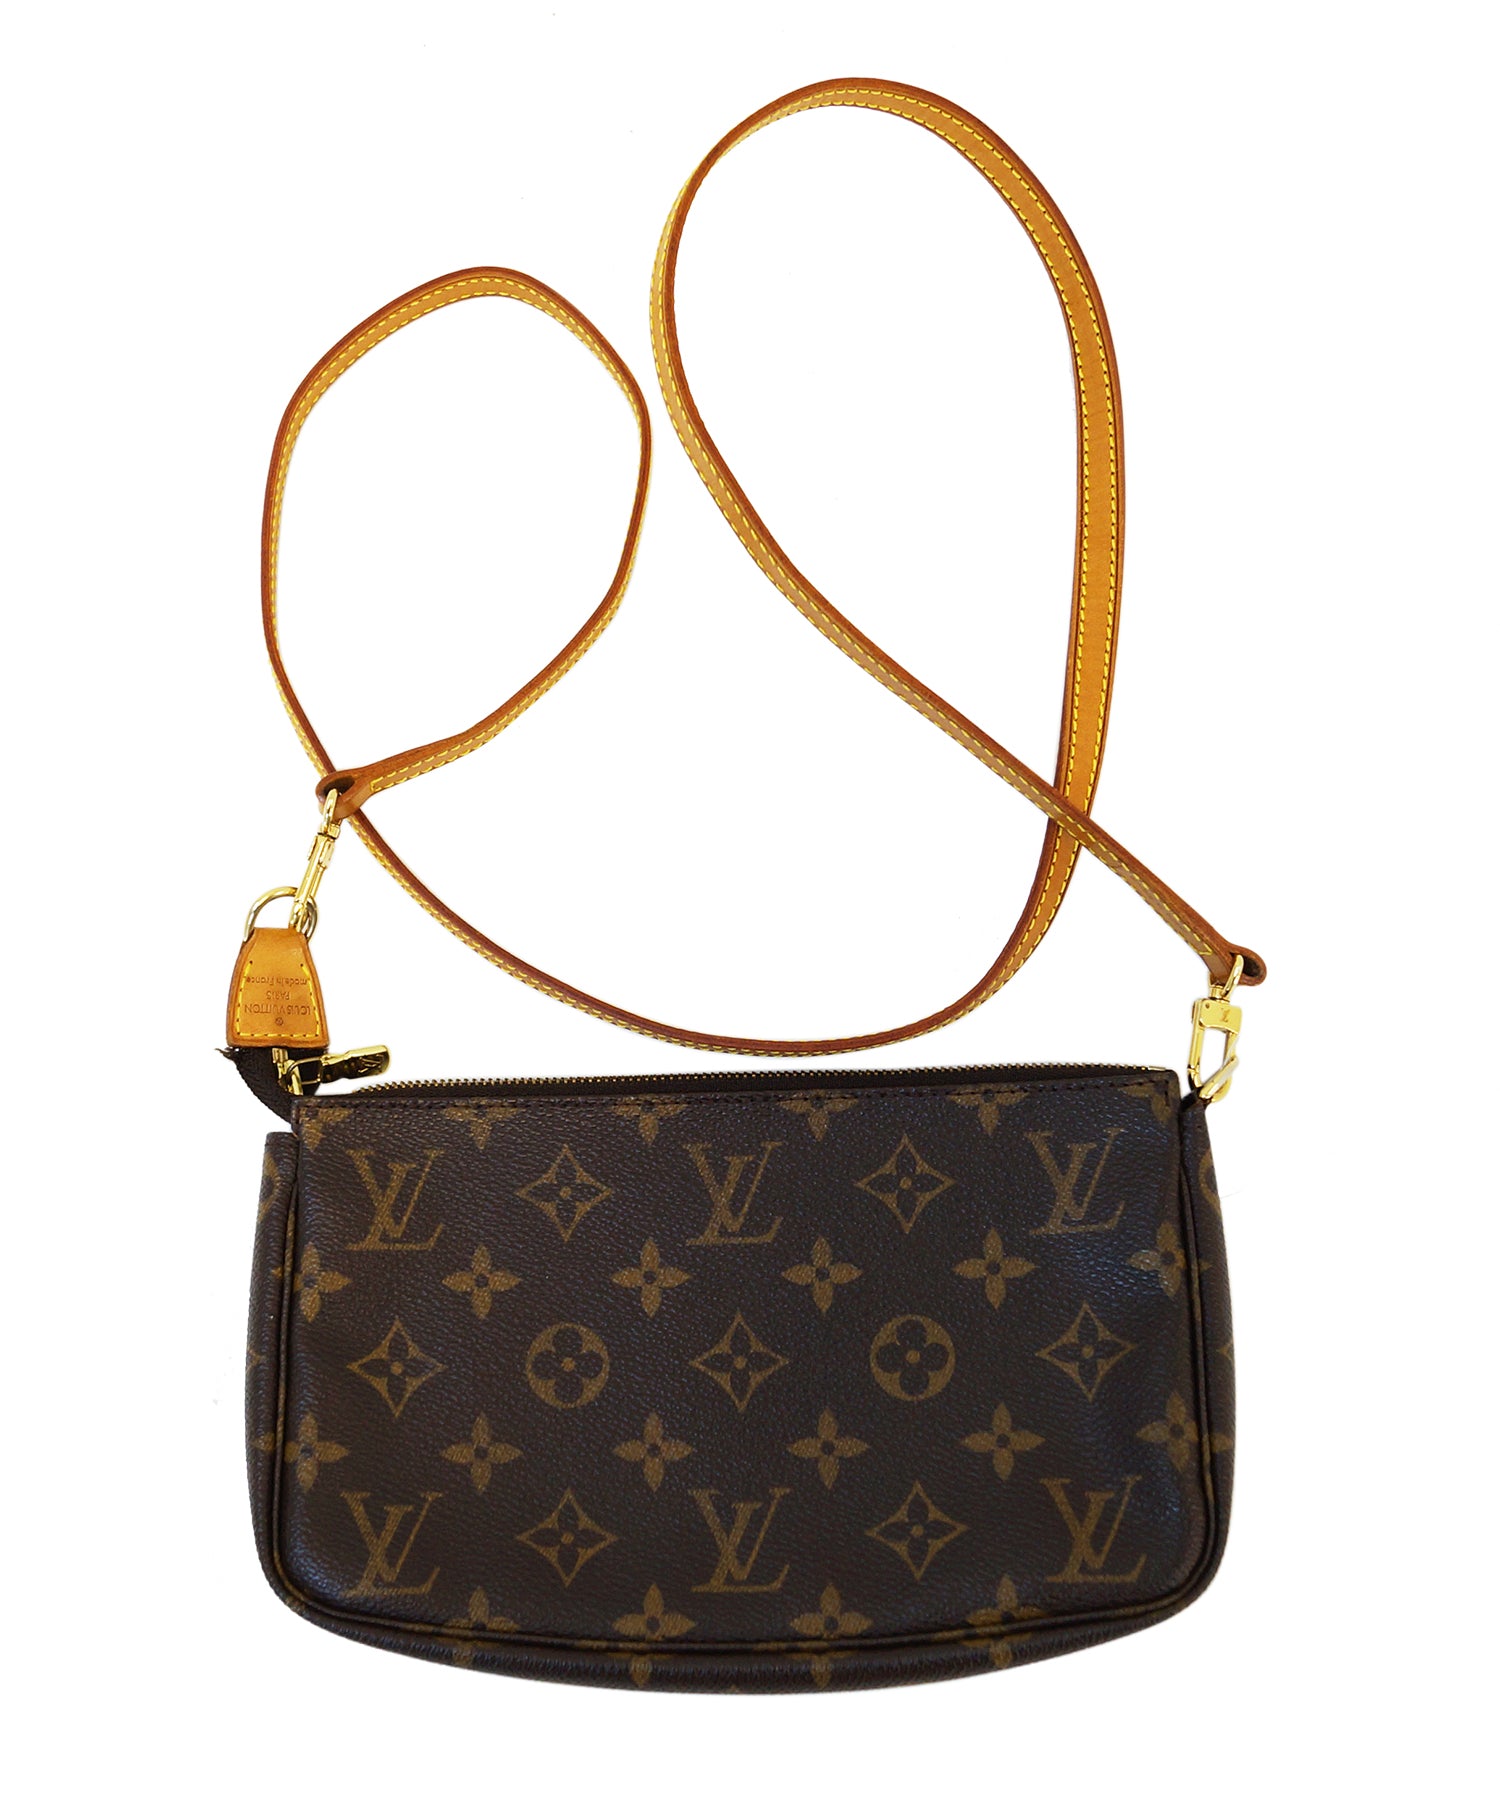 Crossbody Louis Vuitton Purses | Confederated Tribes of the Umatilla Indian Reservation